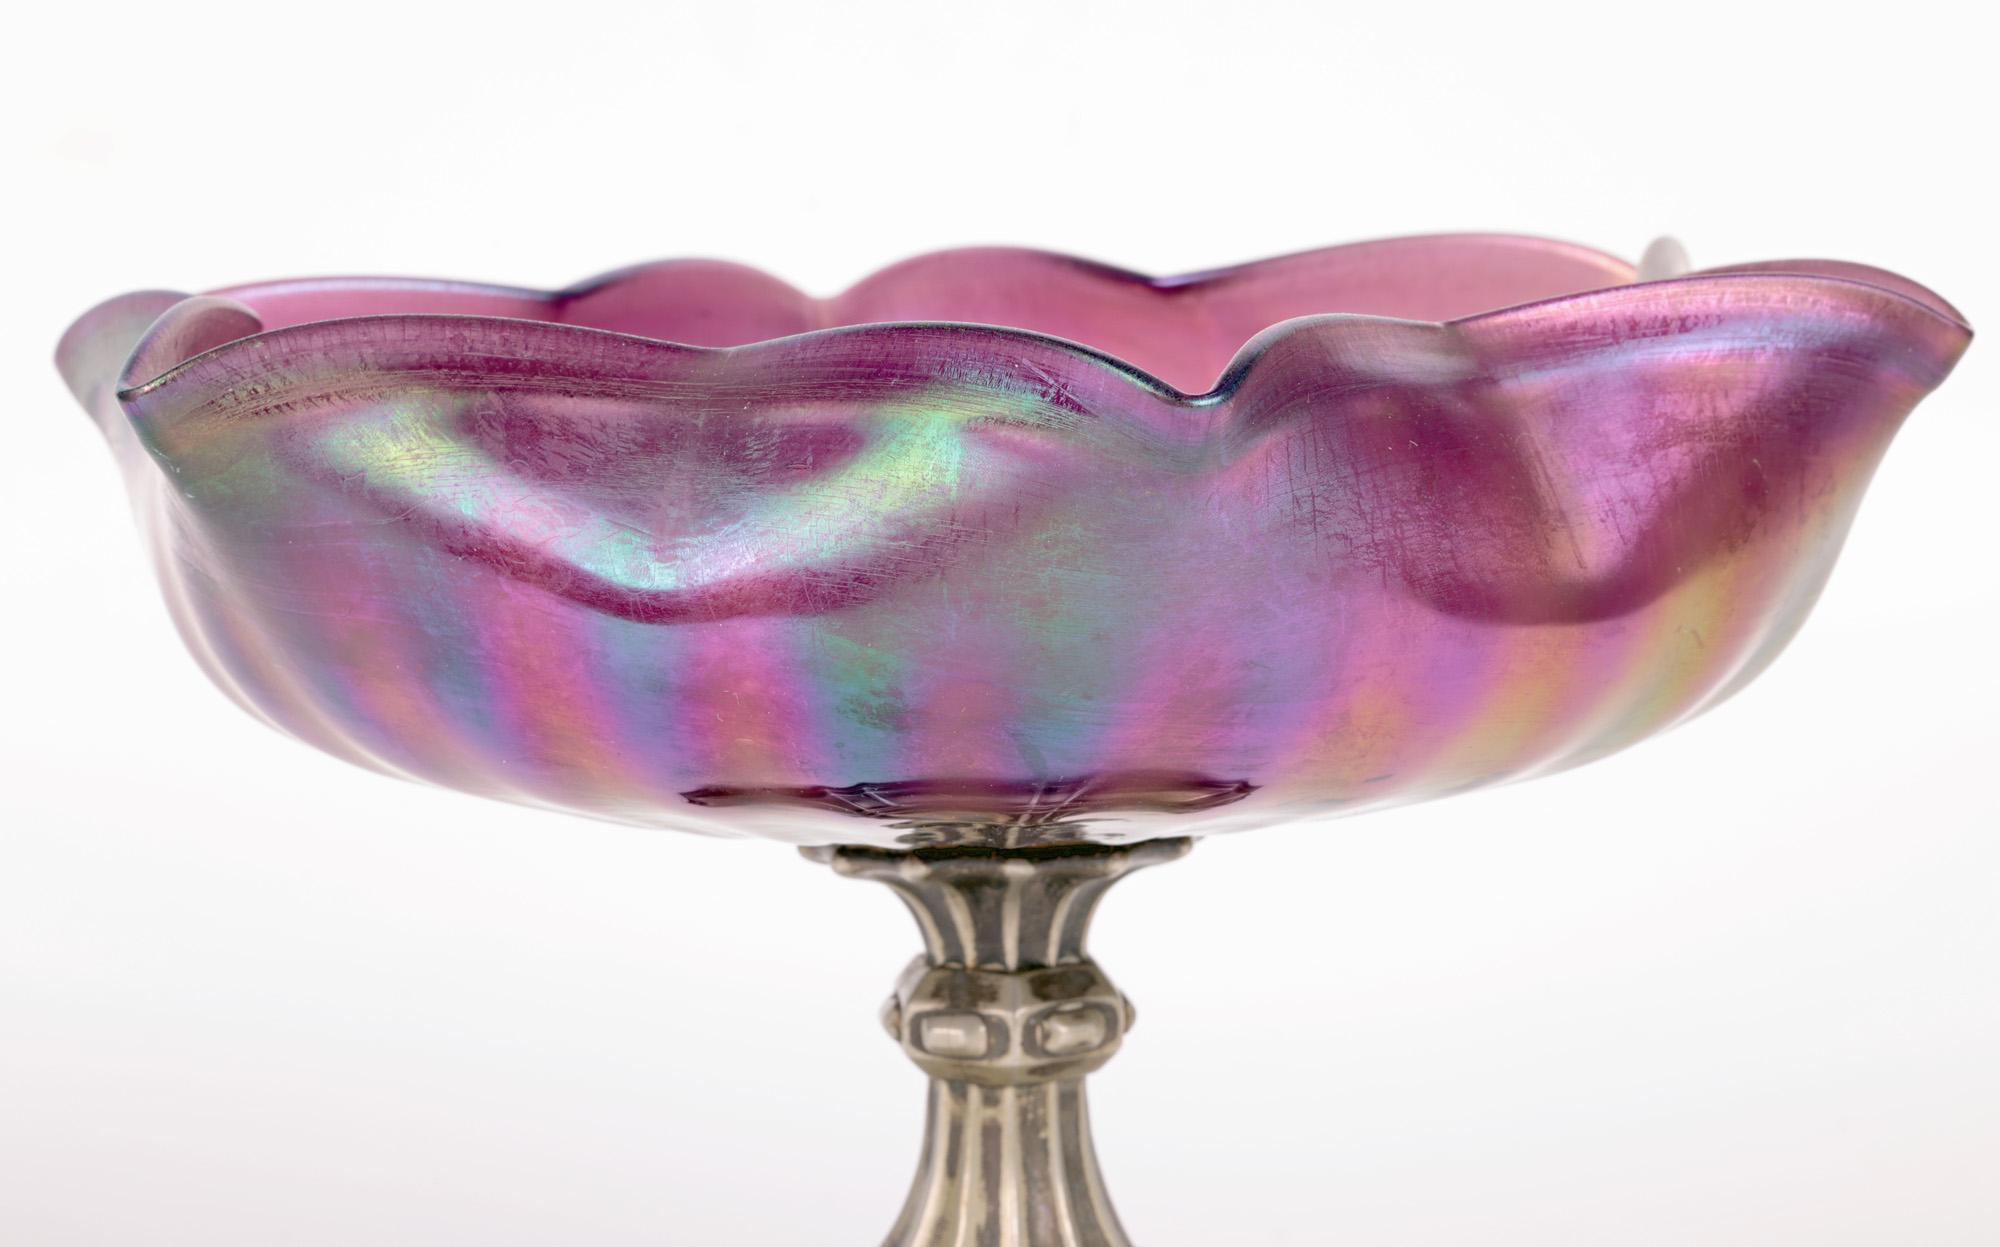 A stylish Czech/Bohemian Art Nouveau pedestal iridescent purple glass bowl attributed to renowned makers Kralik and dating from around 1904. The bowl is hand blown in wide rounded shaped with a pinched and floral shaped rim with ribbing extending